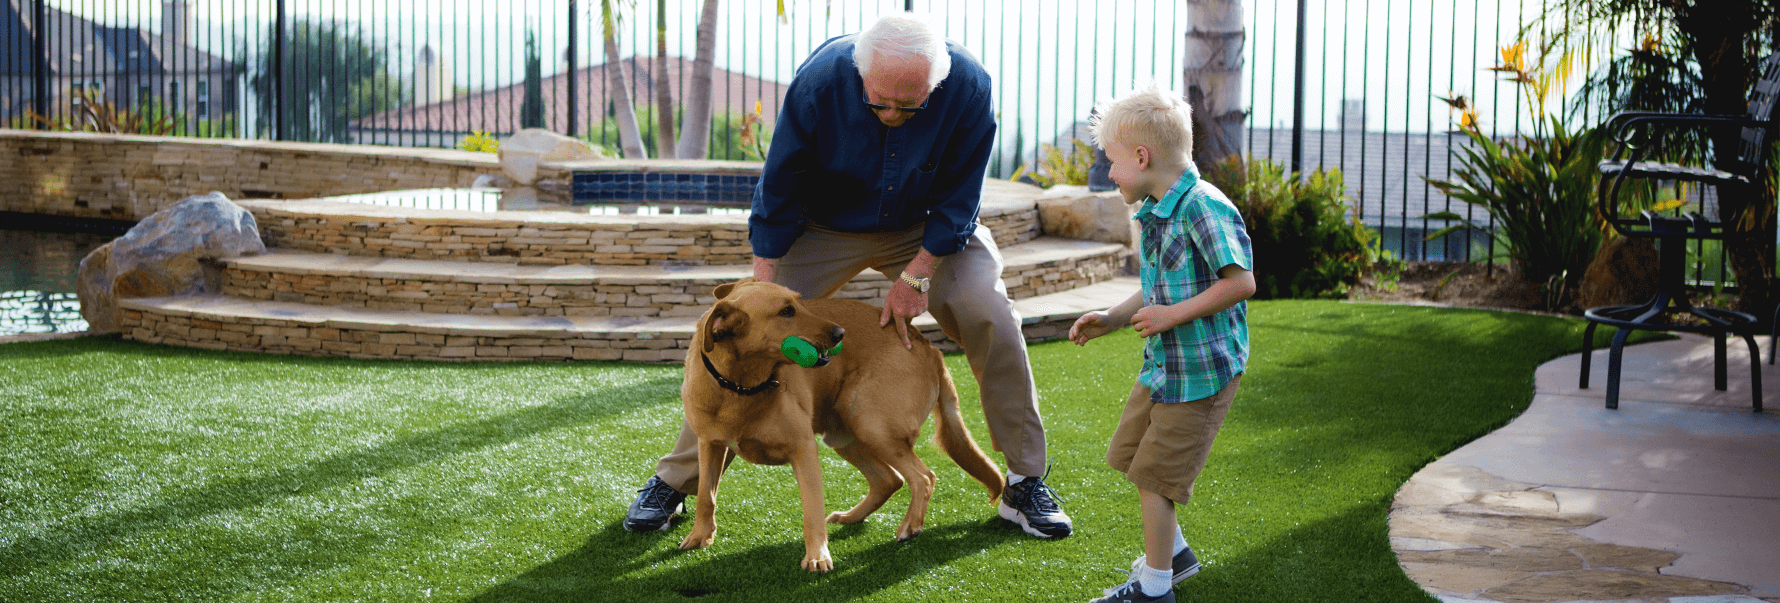 Father and son playing with their dog on an artificial grass lawn